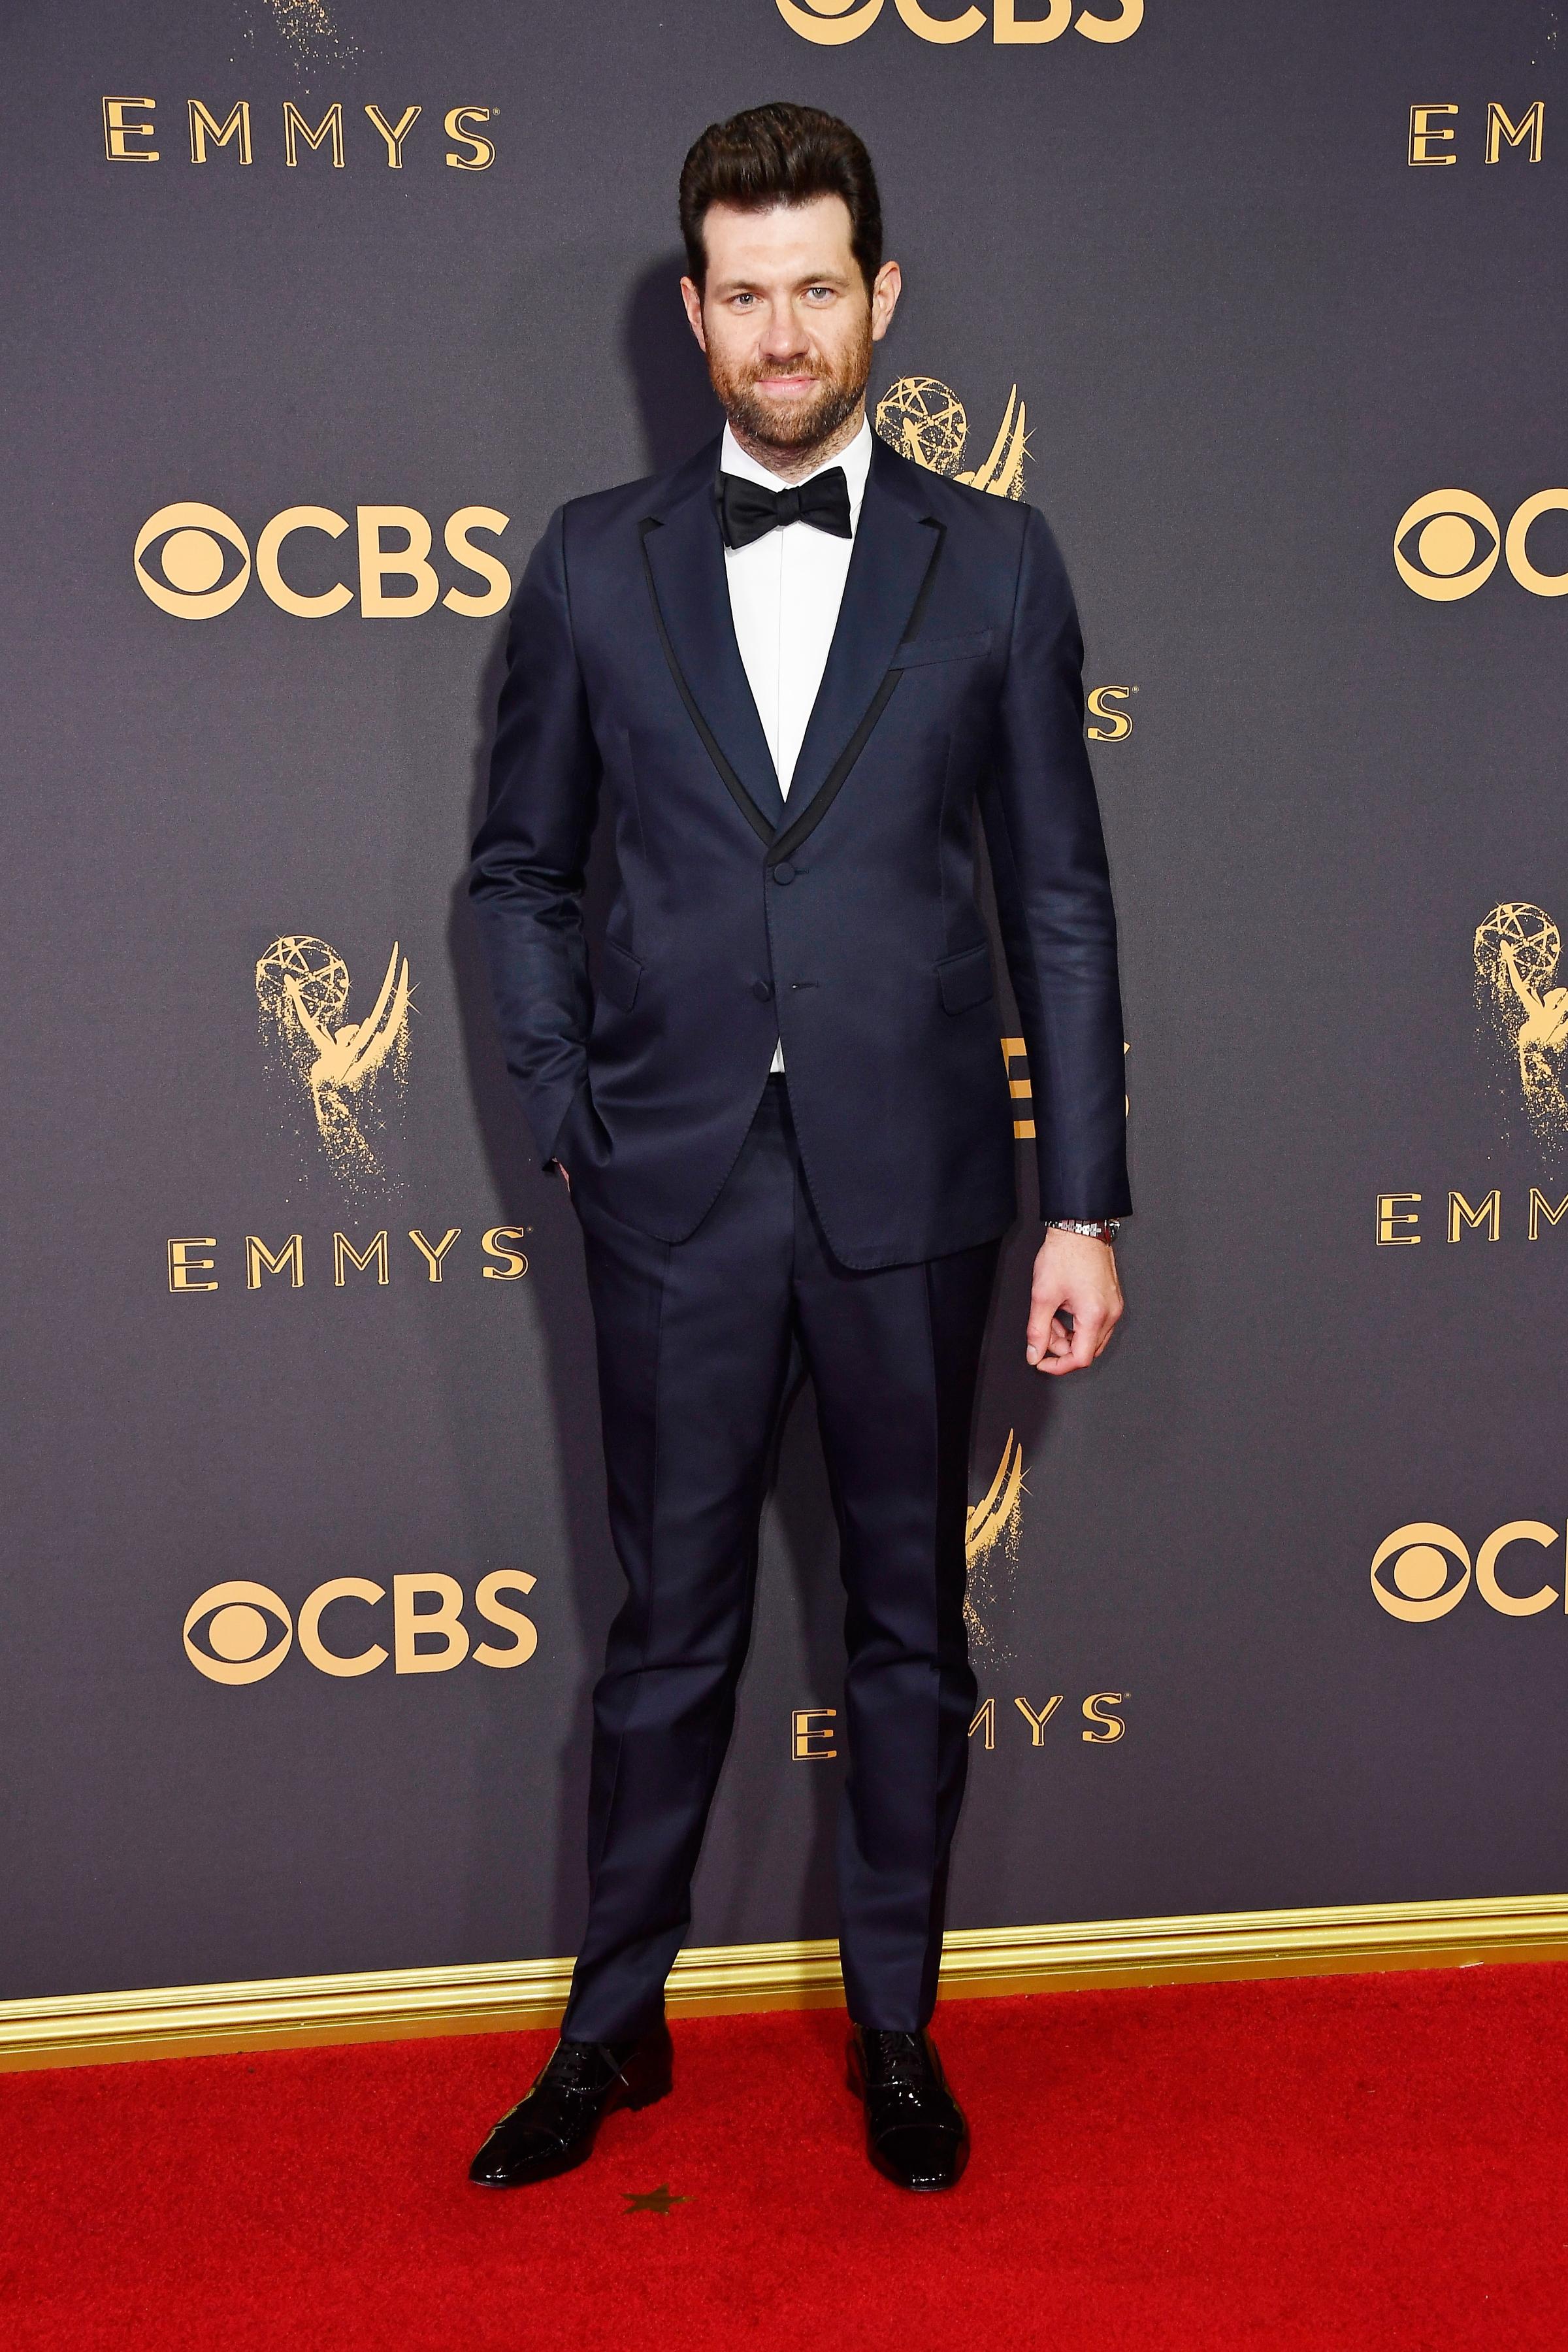 Actor Billy Eichner attends the 69th Annual Primetime Emmy Awards at Microsoft Theater on Sept. 17, 2017 in Los Angeles.